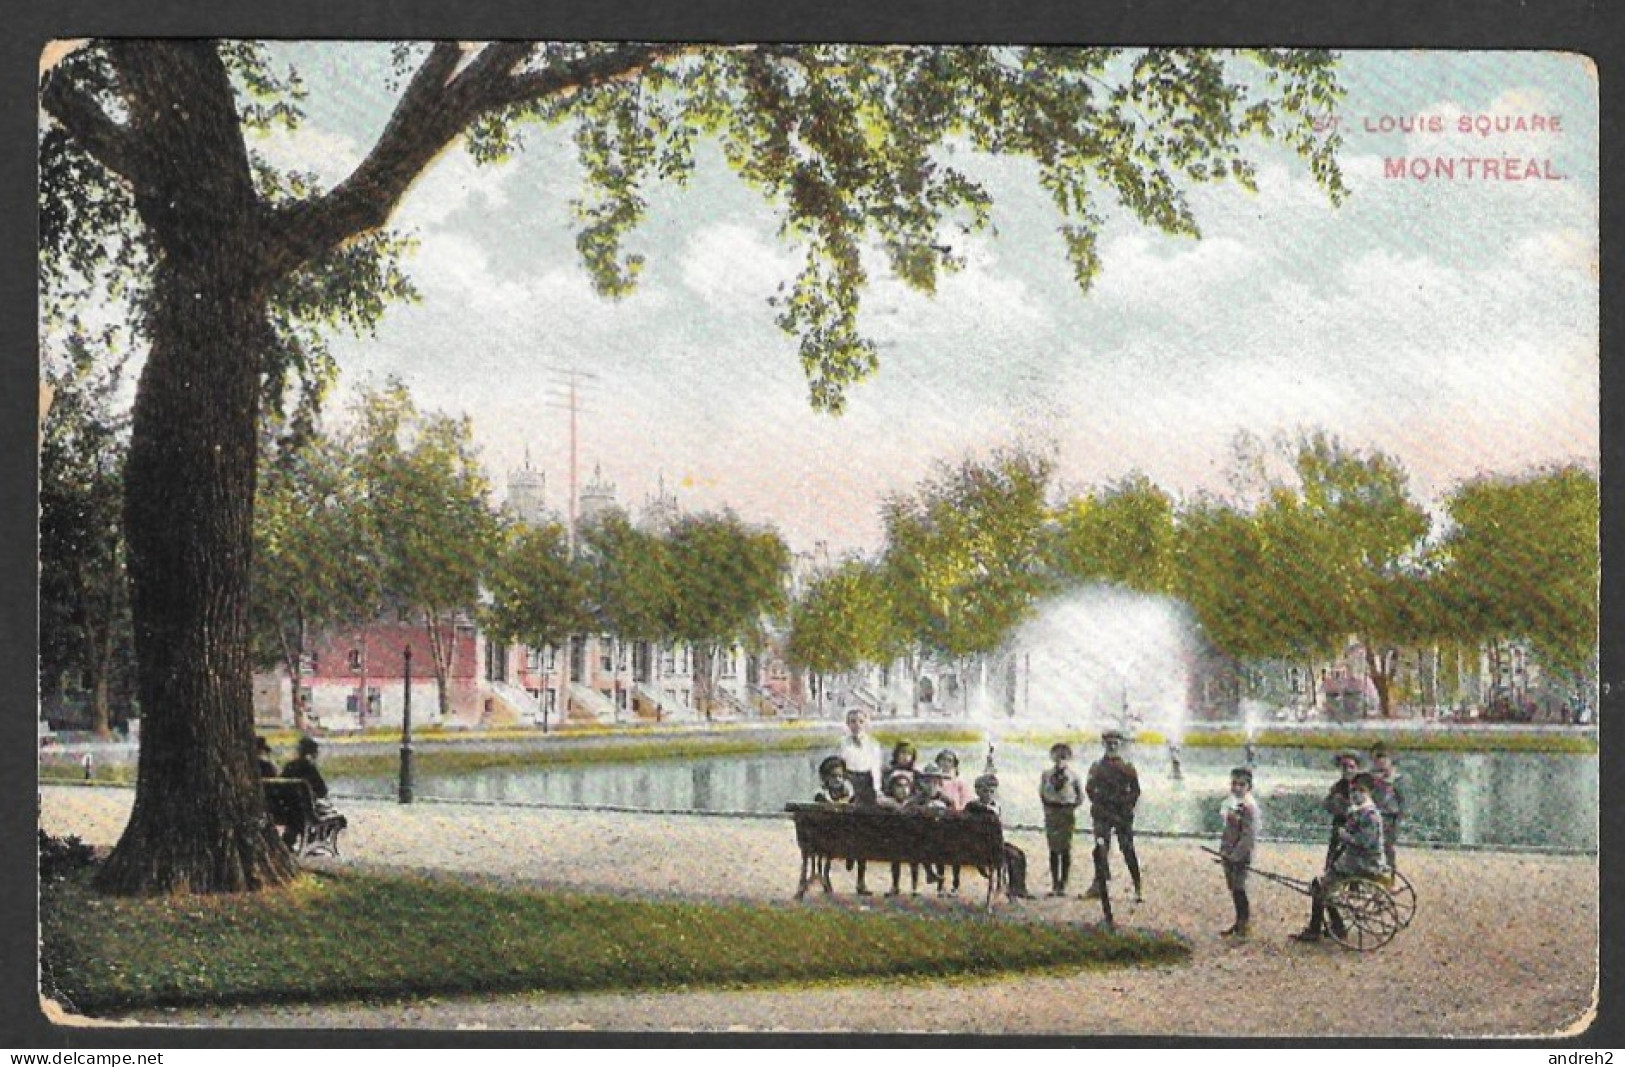 Montreal  Quebec - Postmarked 1908 - C.P.A. - St Louis Square Montreal - By E.P. Charlton - Montreal